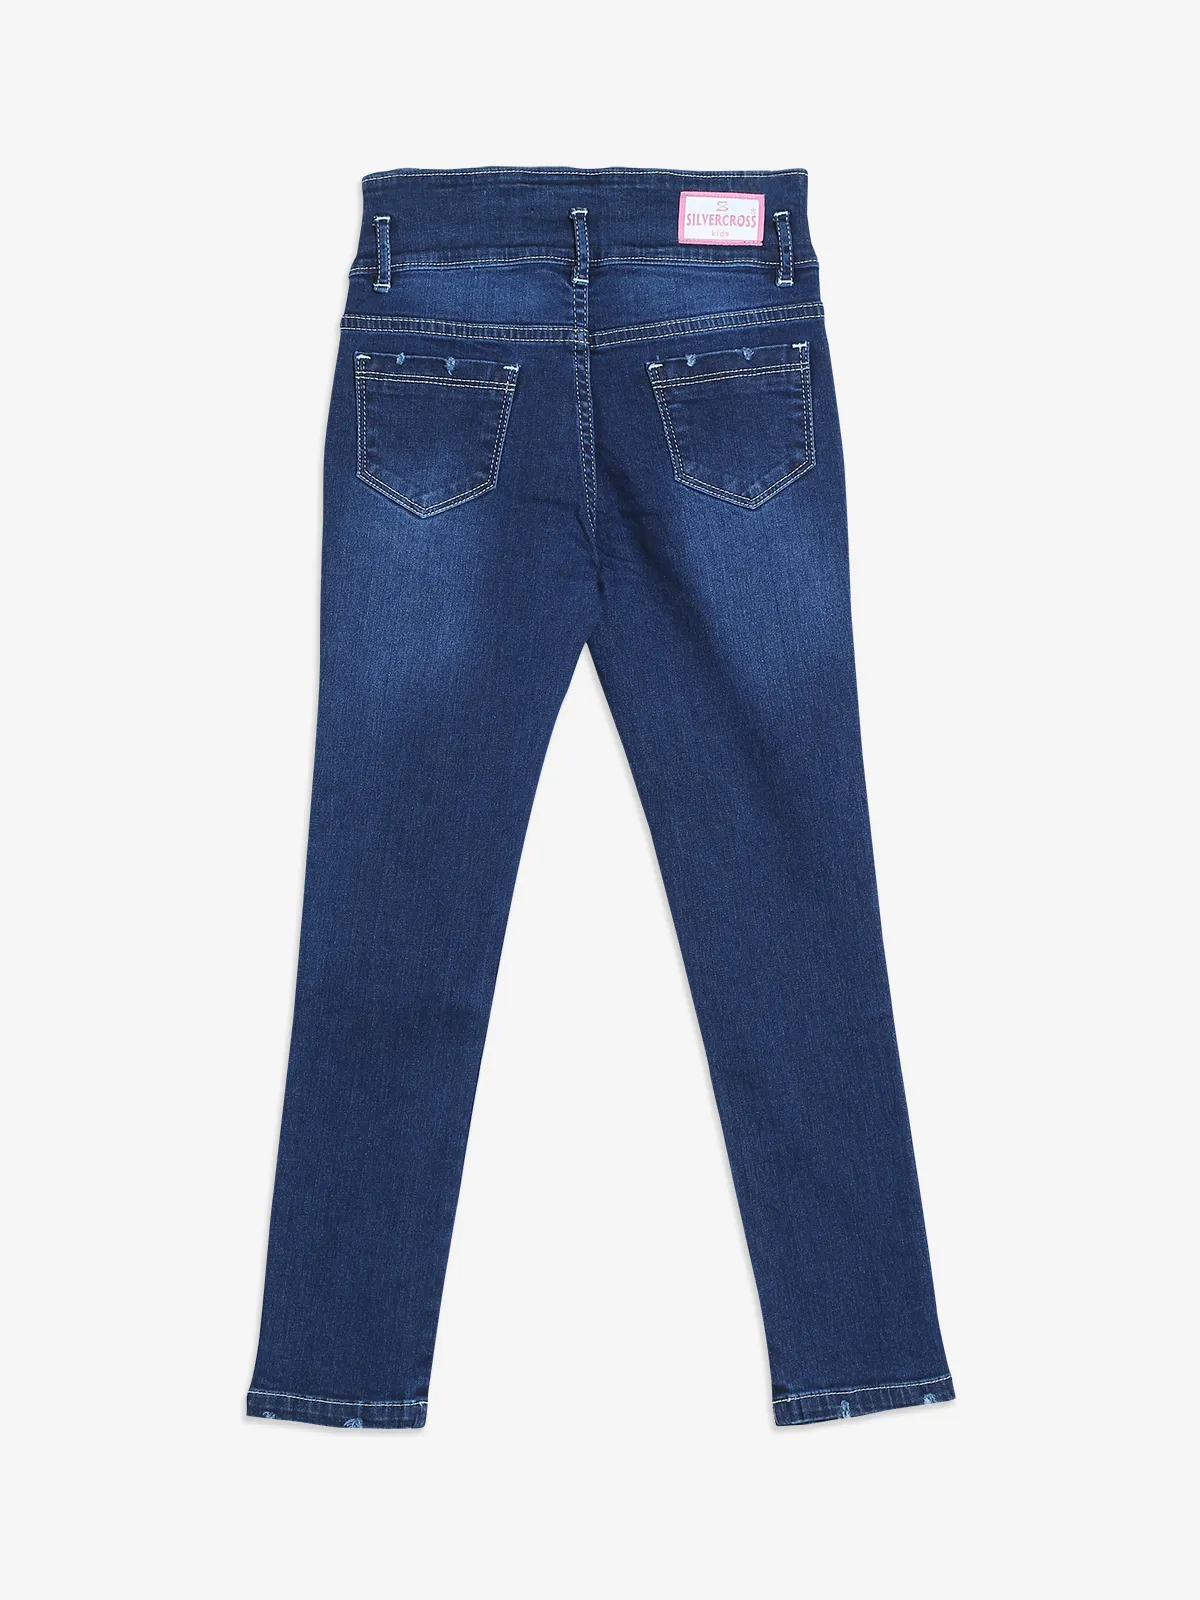 Silver Cross washed and ripped navy jeans